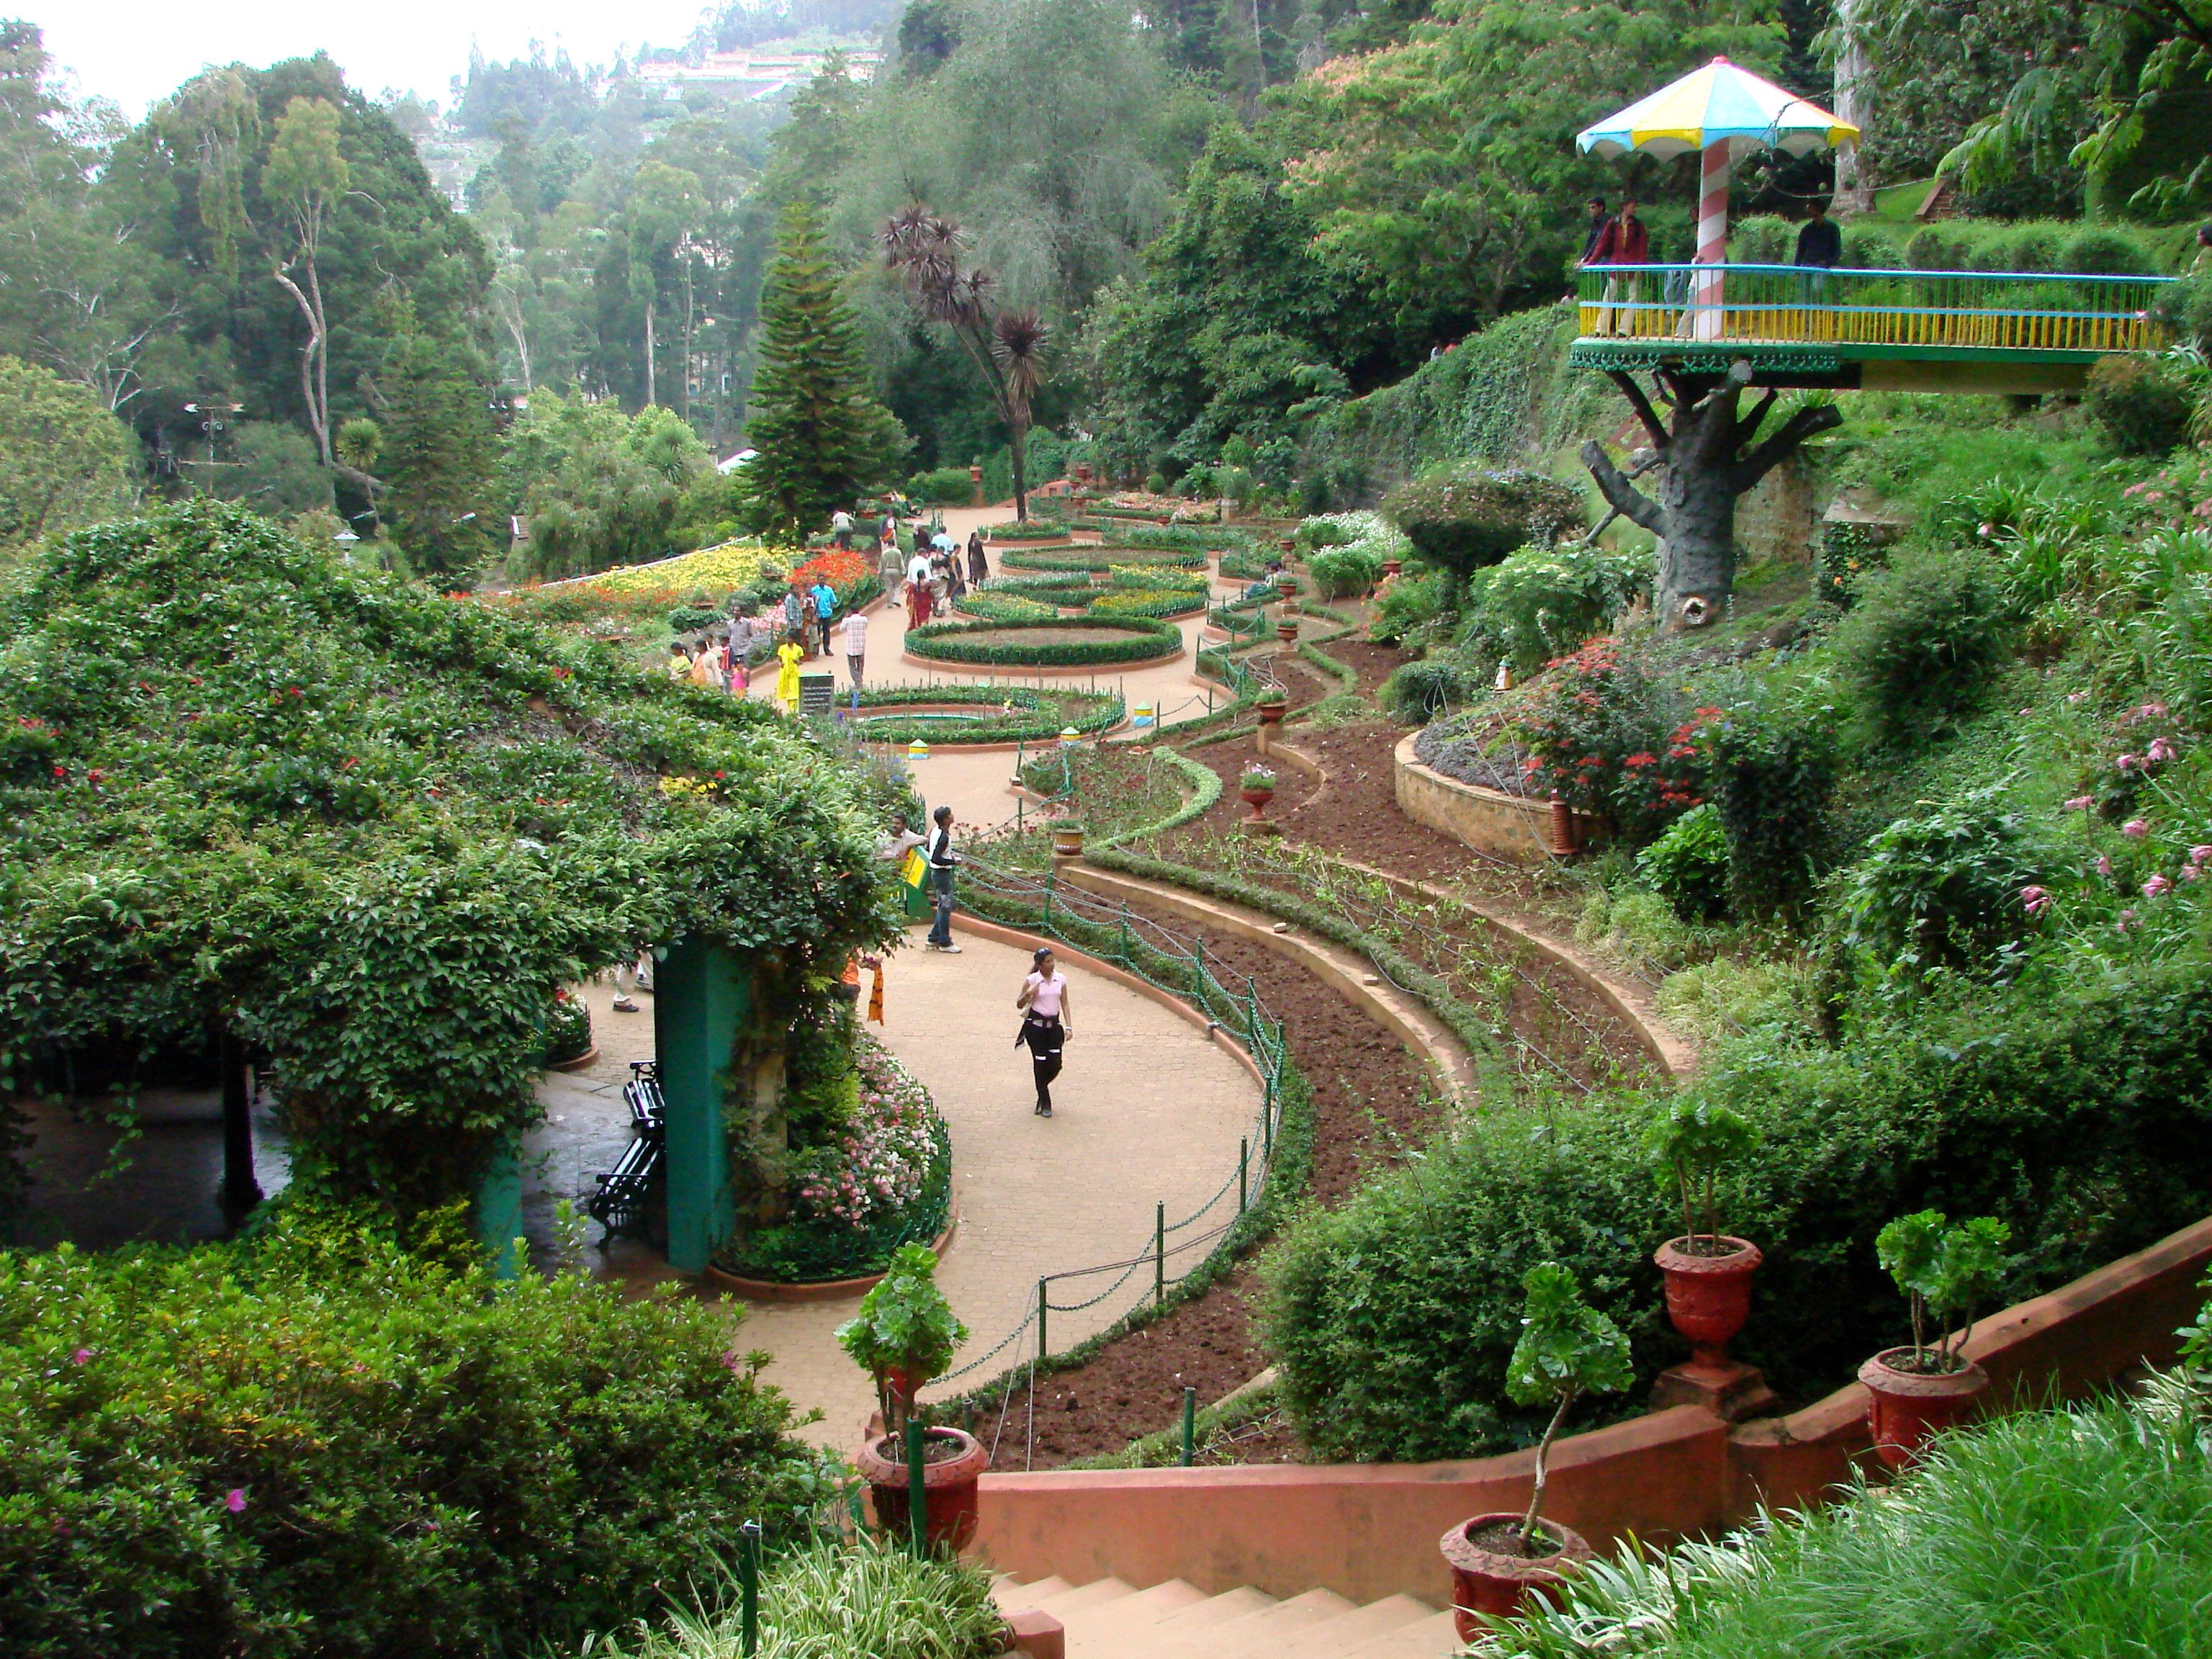 OOTY Photo, Image and Wallpaper